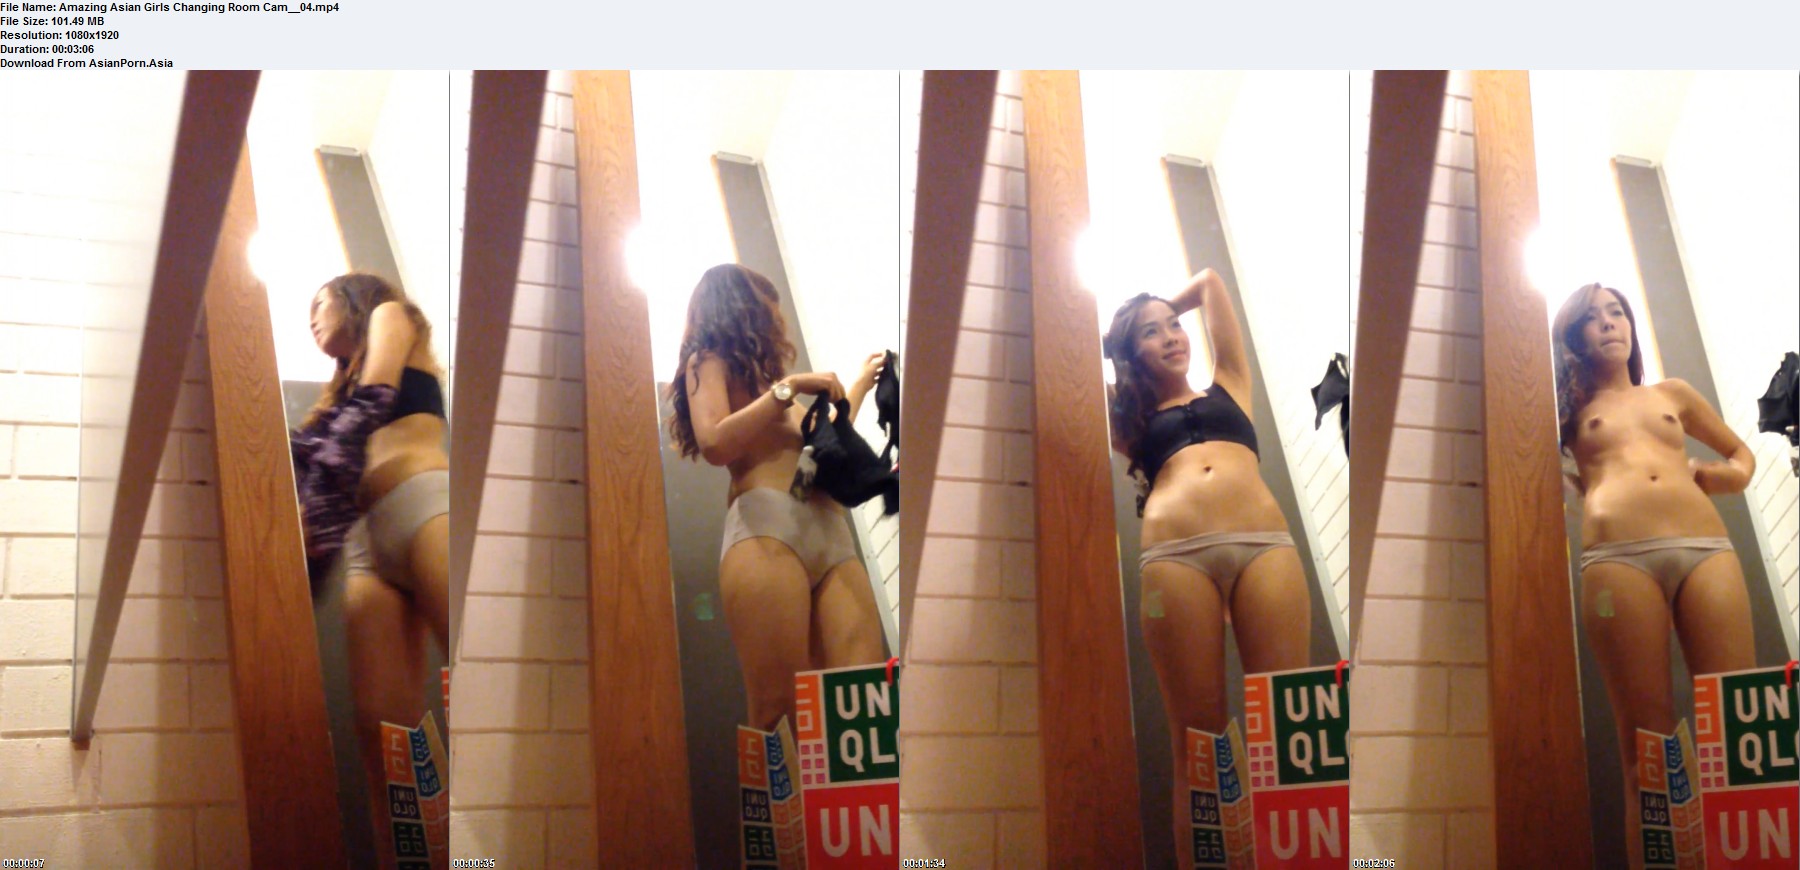 Amazing Asian Girls Changing Room Cam